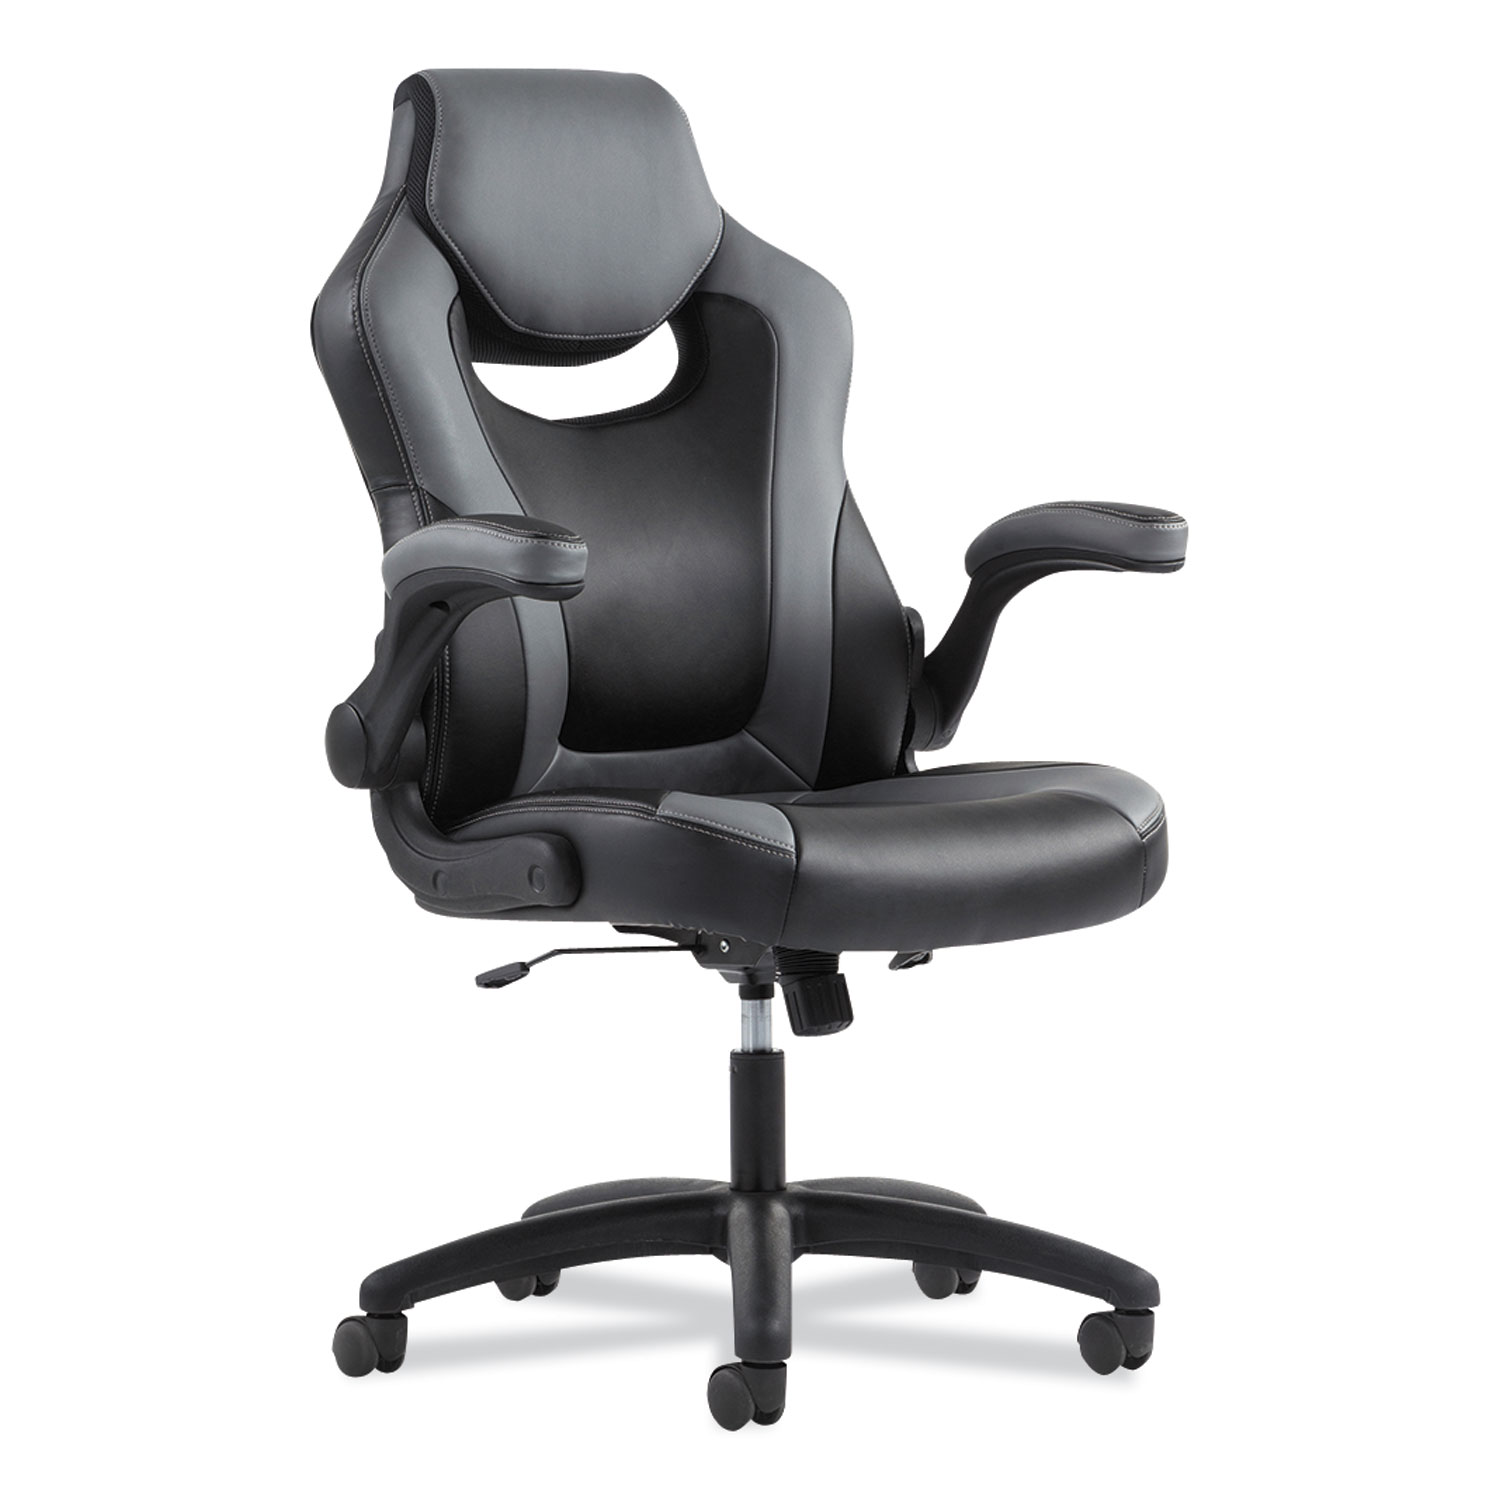  Sadie BSXVST911 9-One-One High-Back Racing Style Chair with Flip-Up Arms, Supports up to 225 lbs., Black Seat/Gray Back, Black Base (BSXVST911) 